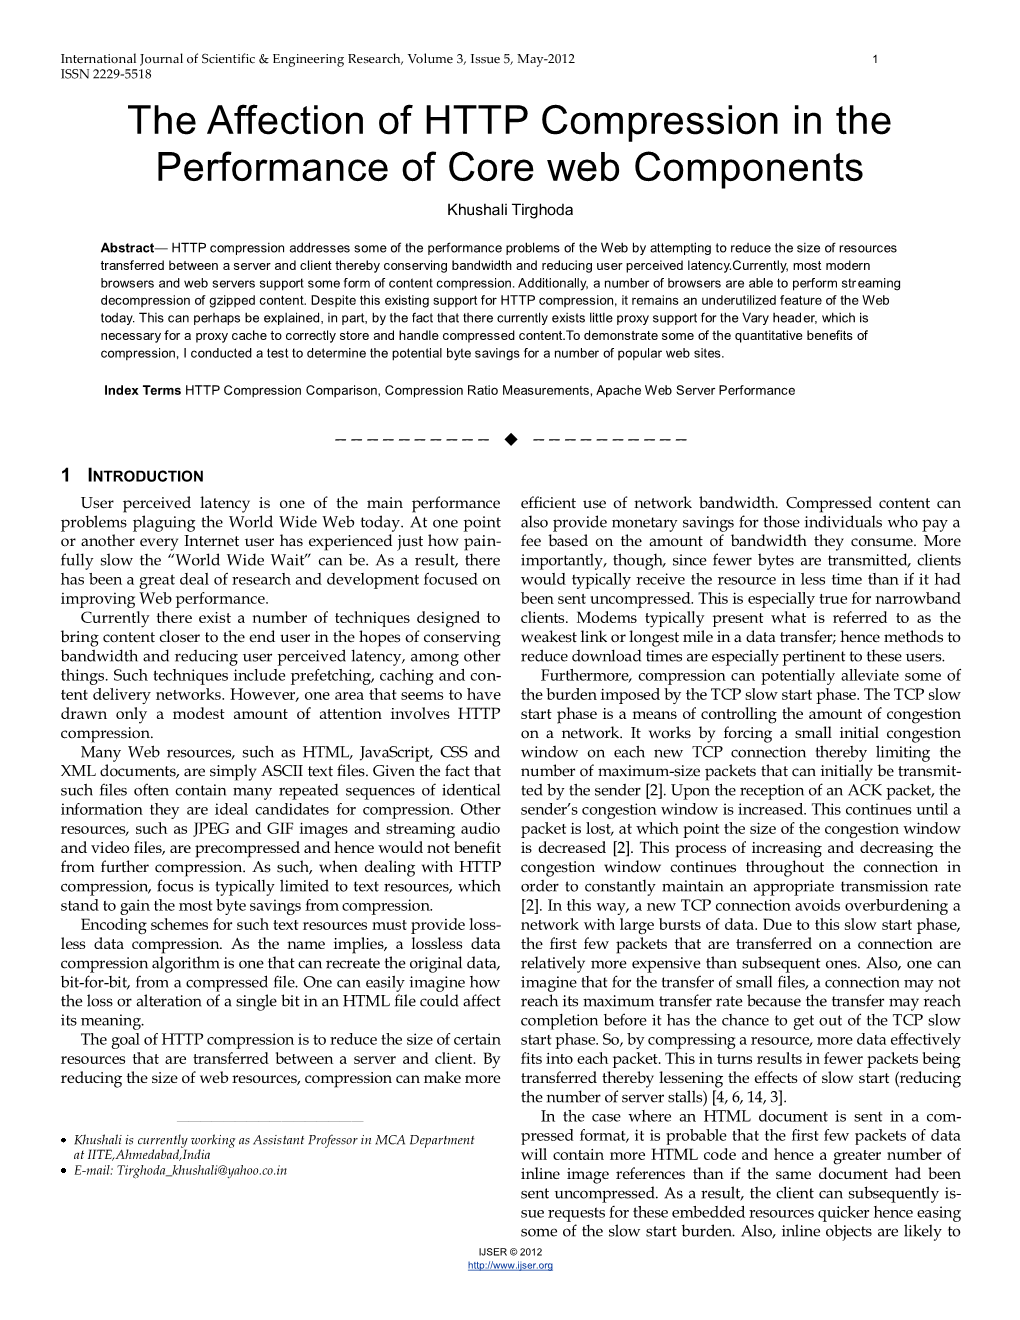 The Affection of HTTP Compression in the Performance of Core Web Components Khushali Tirghoda